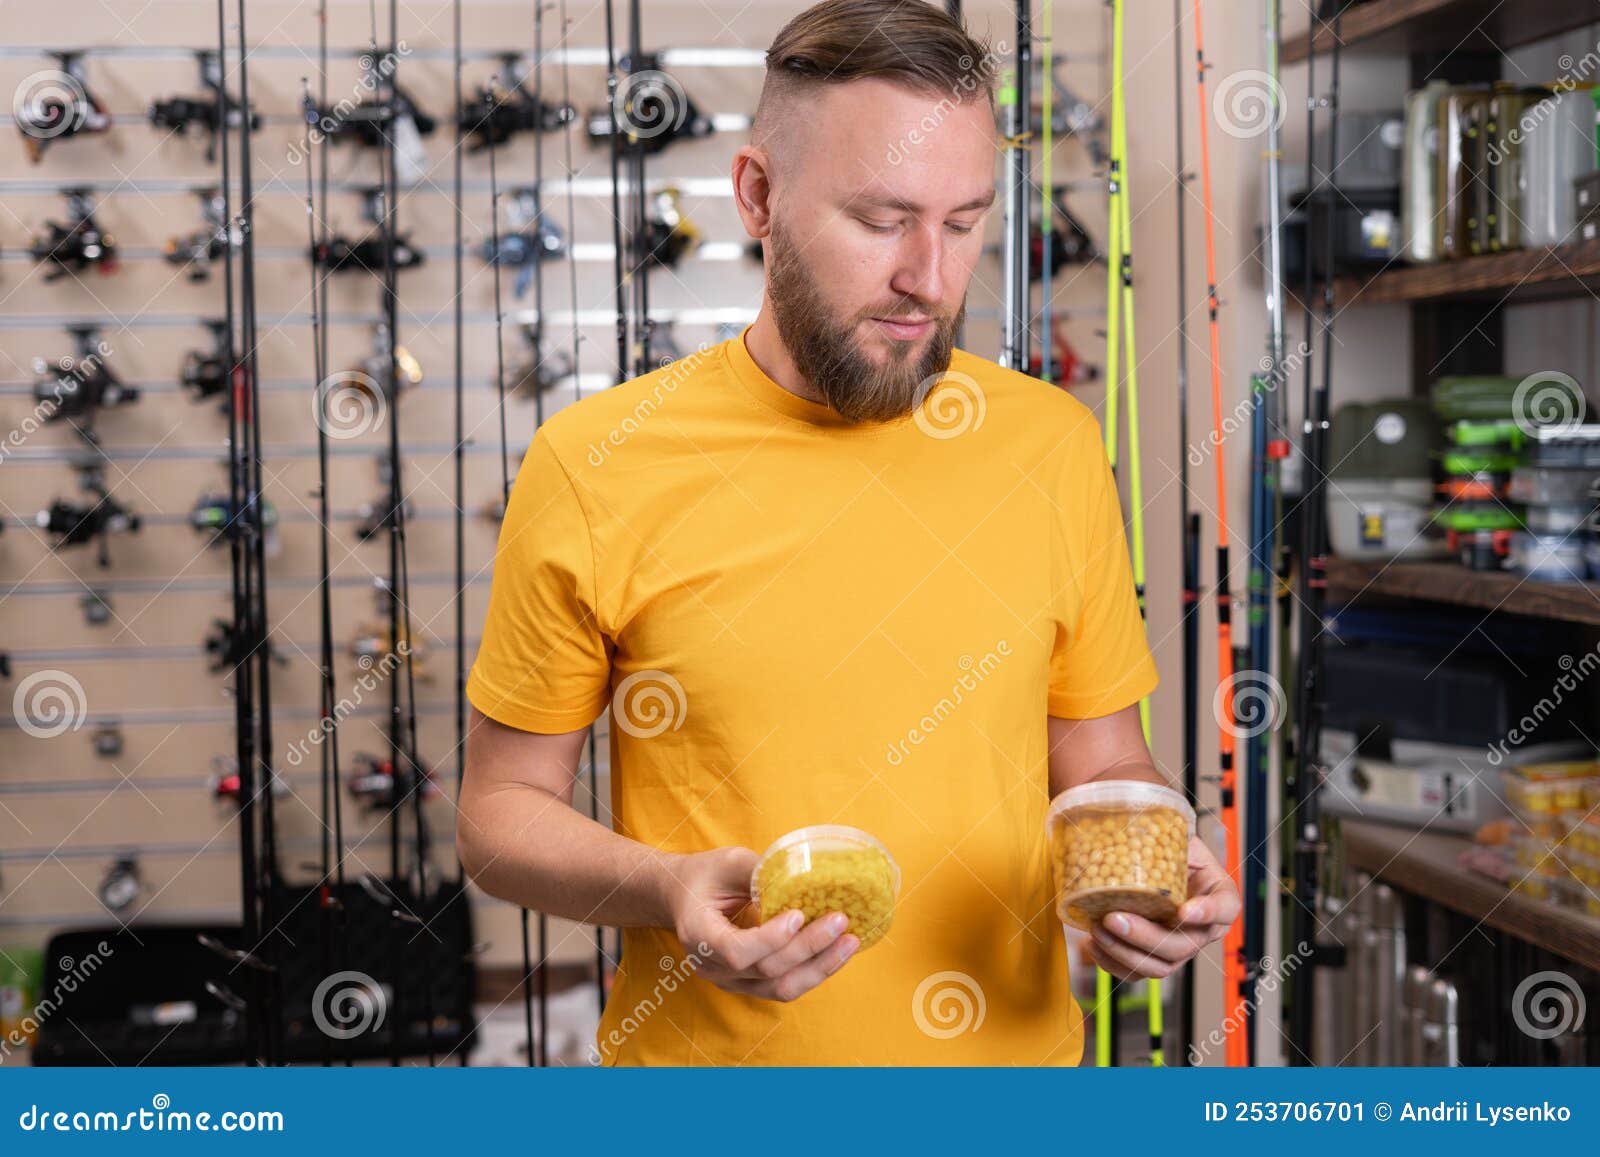 Handsome Fisherman Choosing Fishing Bait for Fishing in the Sports Shop.  Stock Image - Image of market, wobbler: 253706701